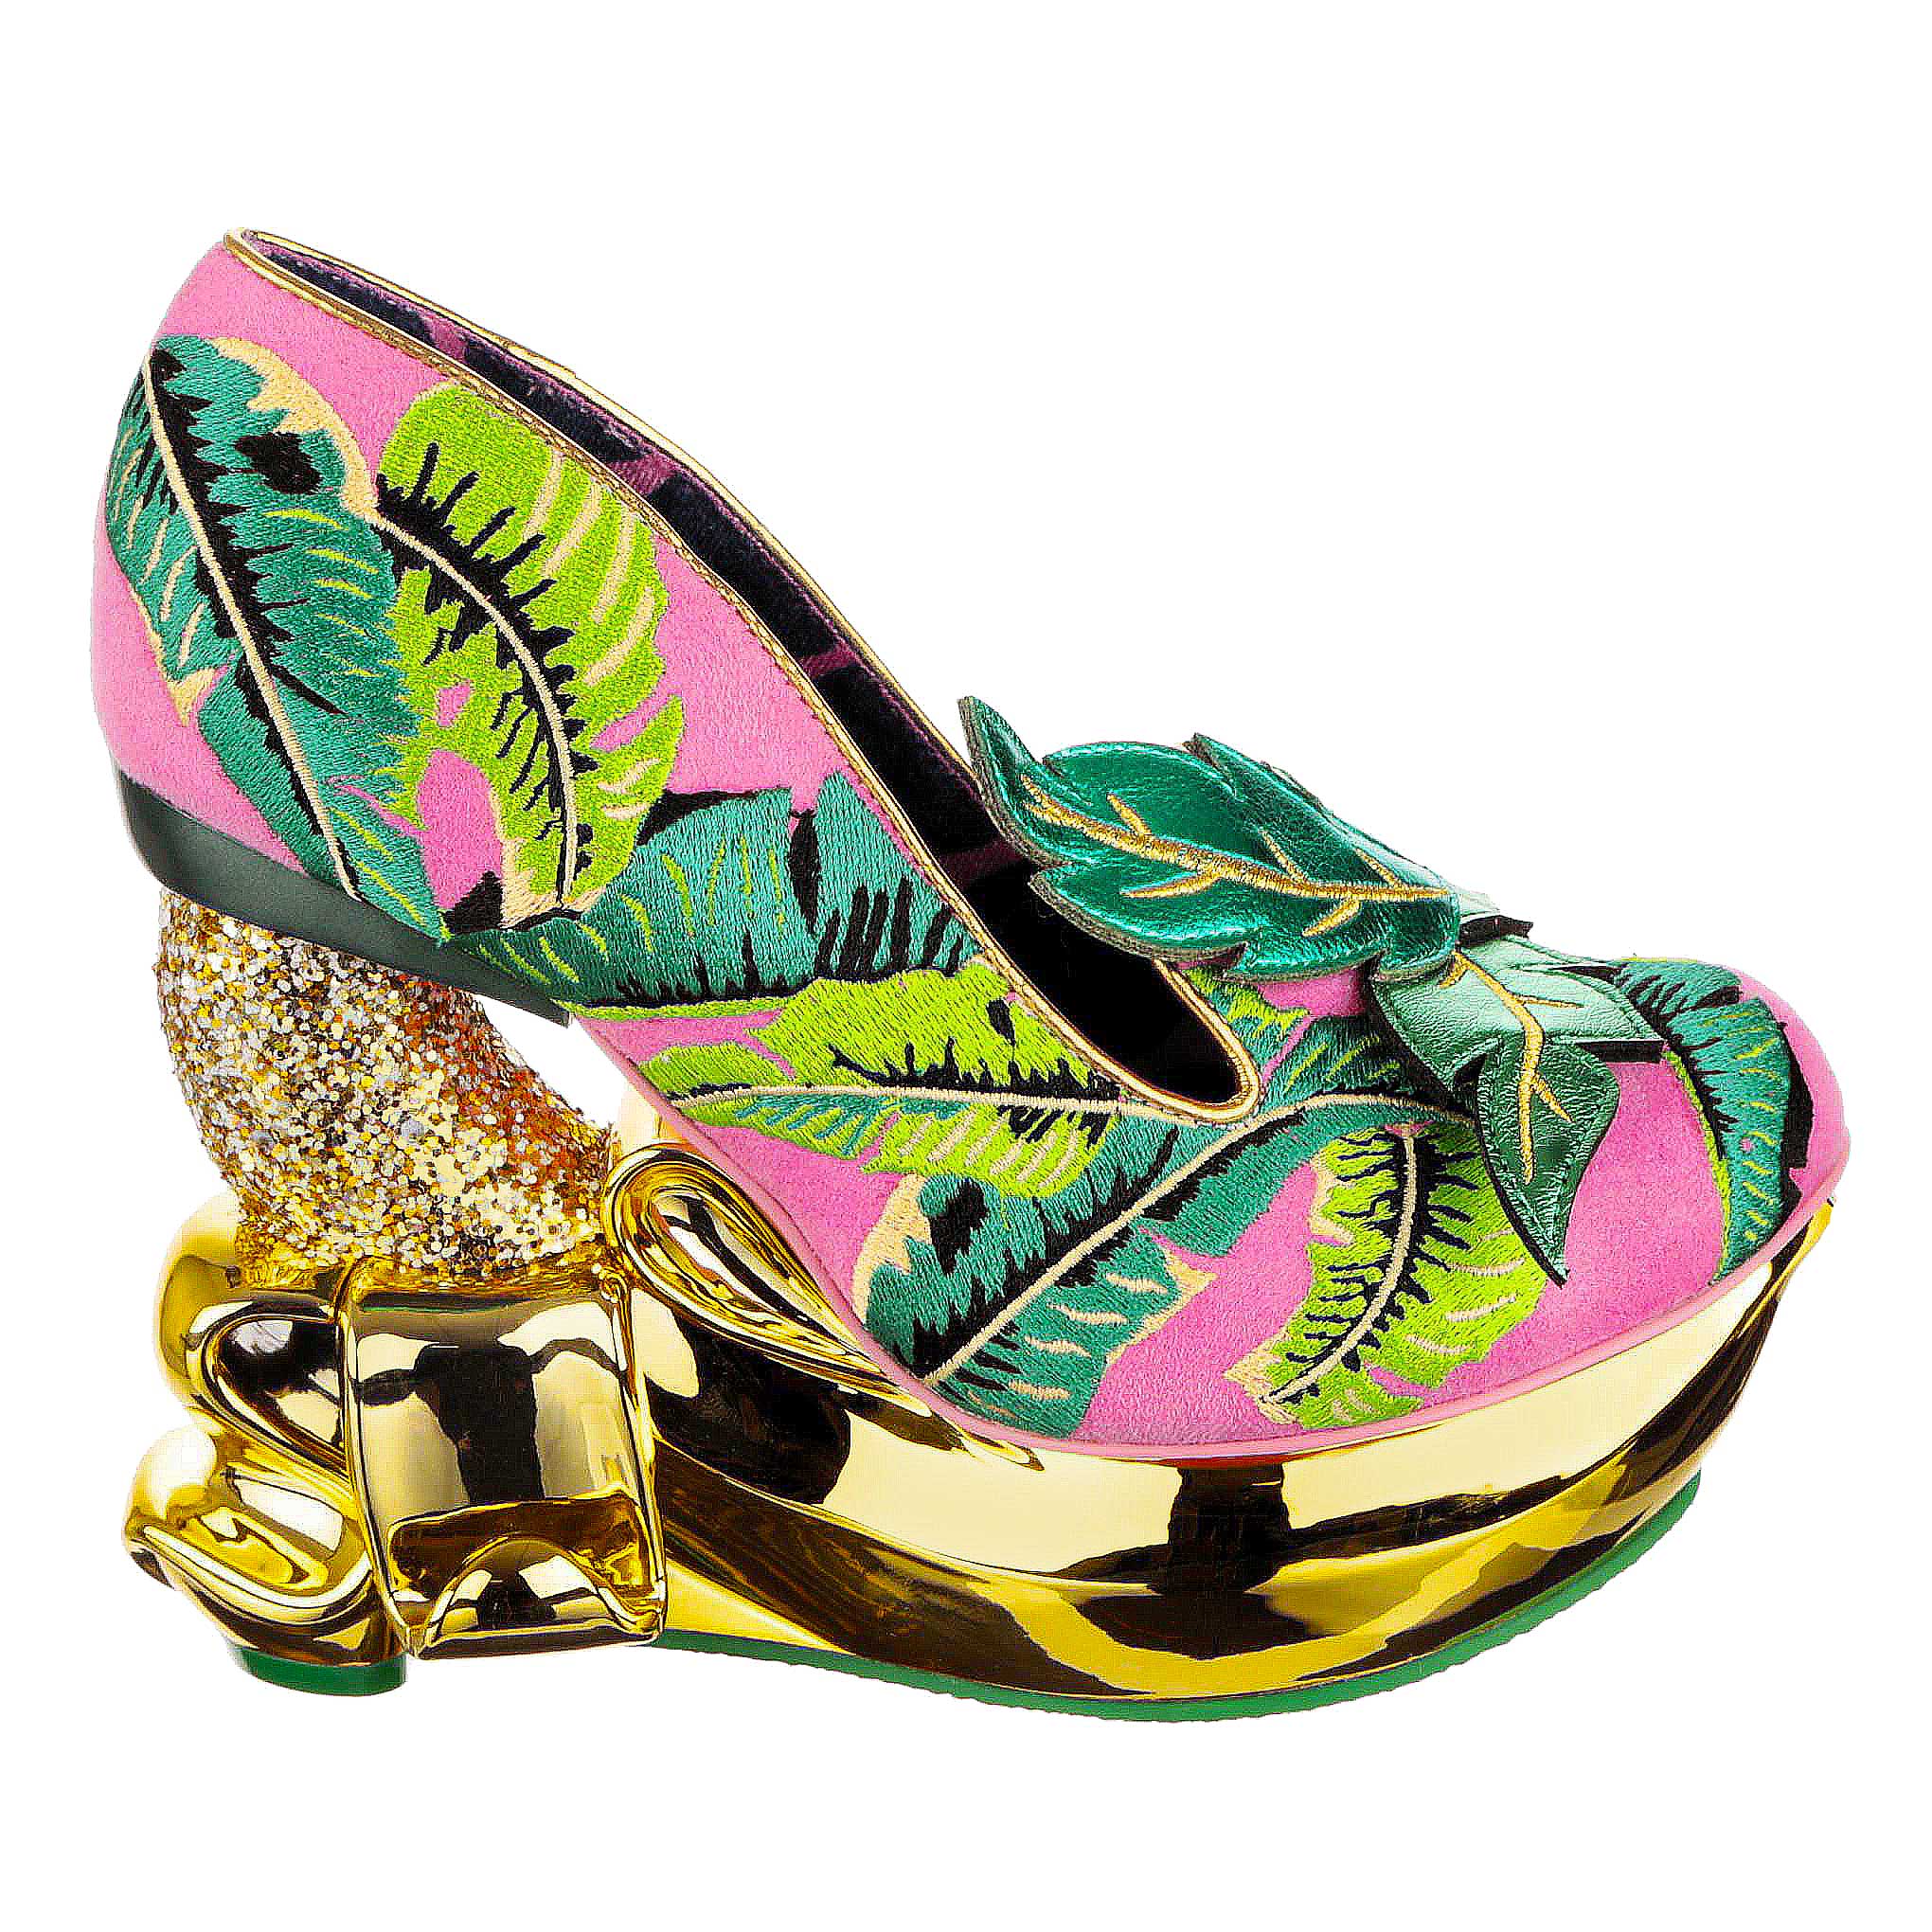 Irregular Choice - Original Footwear to Stand Out From the Crowd